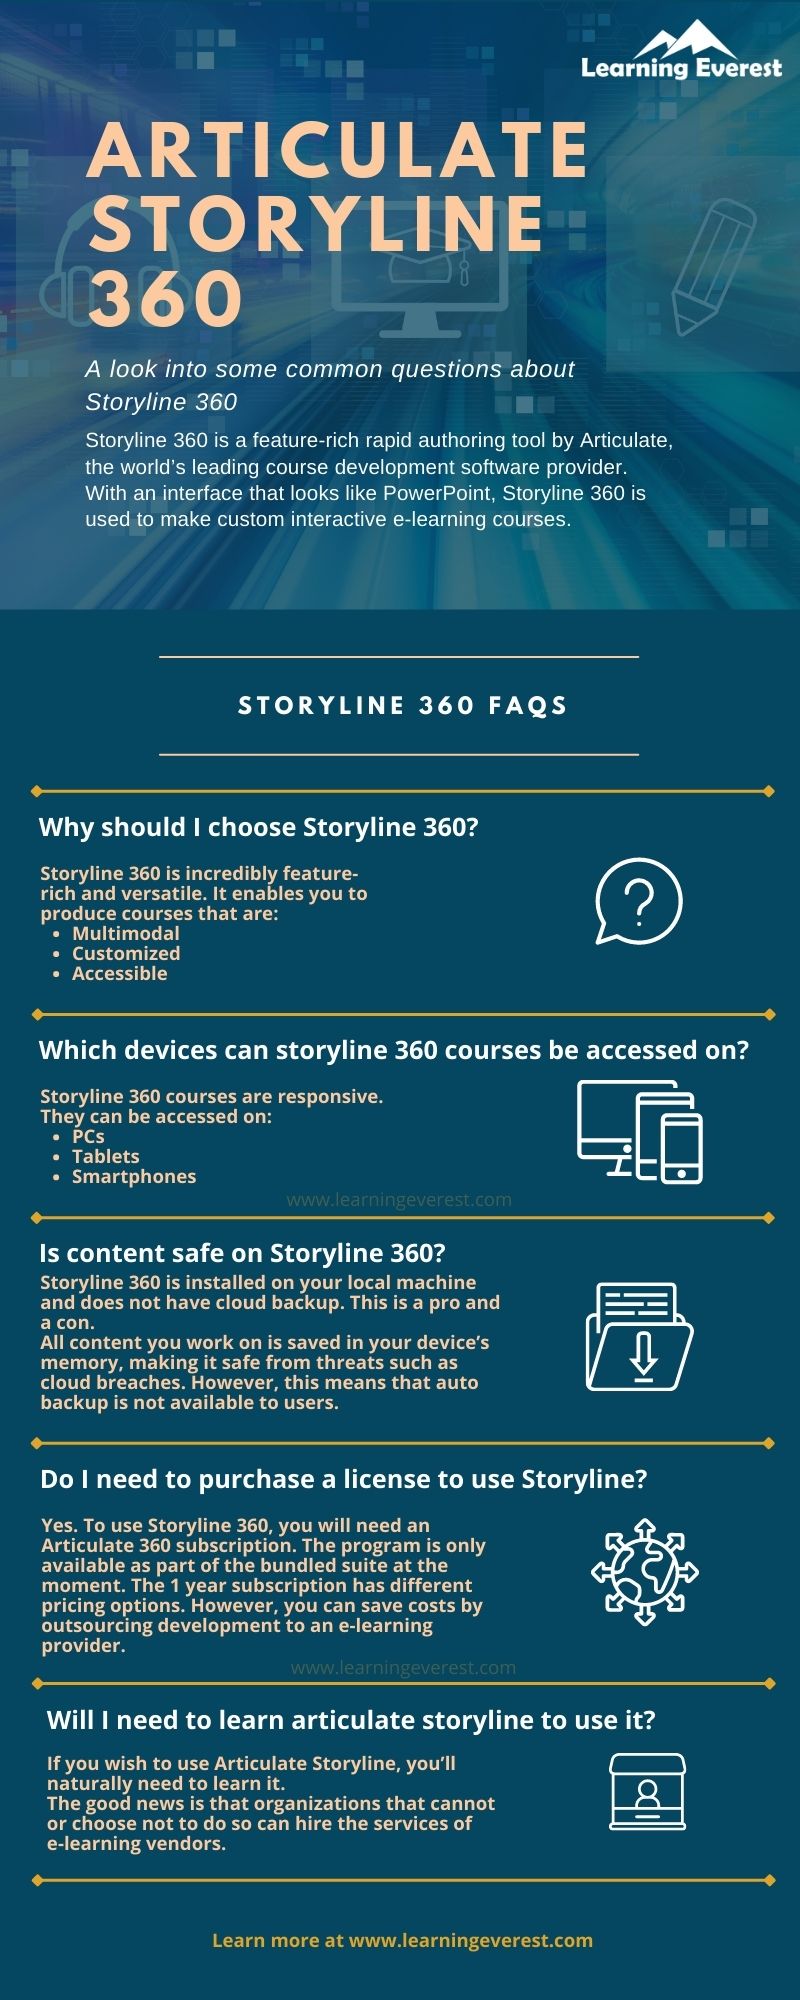 4 Compelling Benefits of Articulate Storyline 360